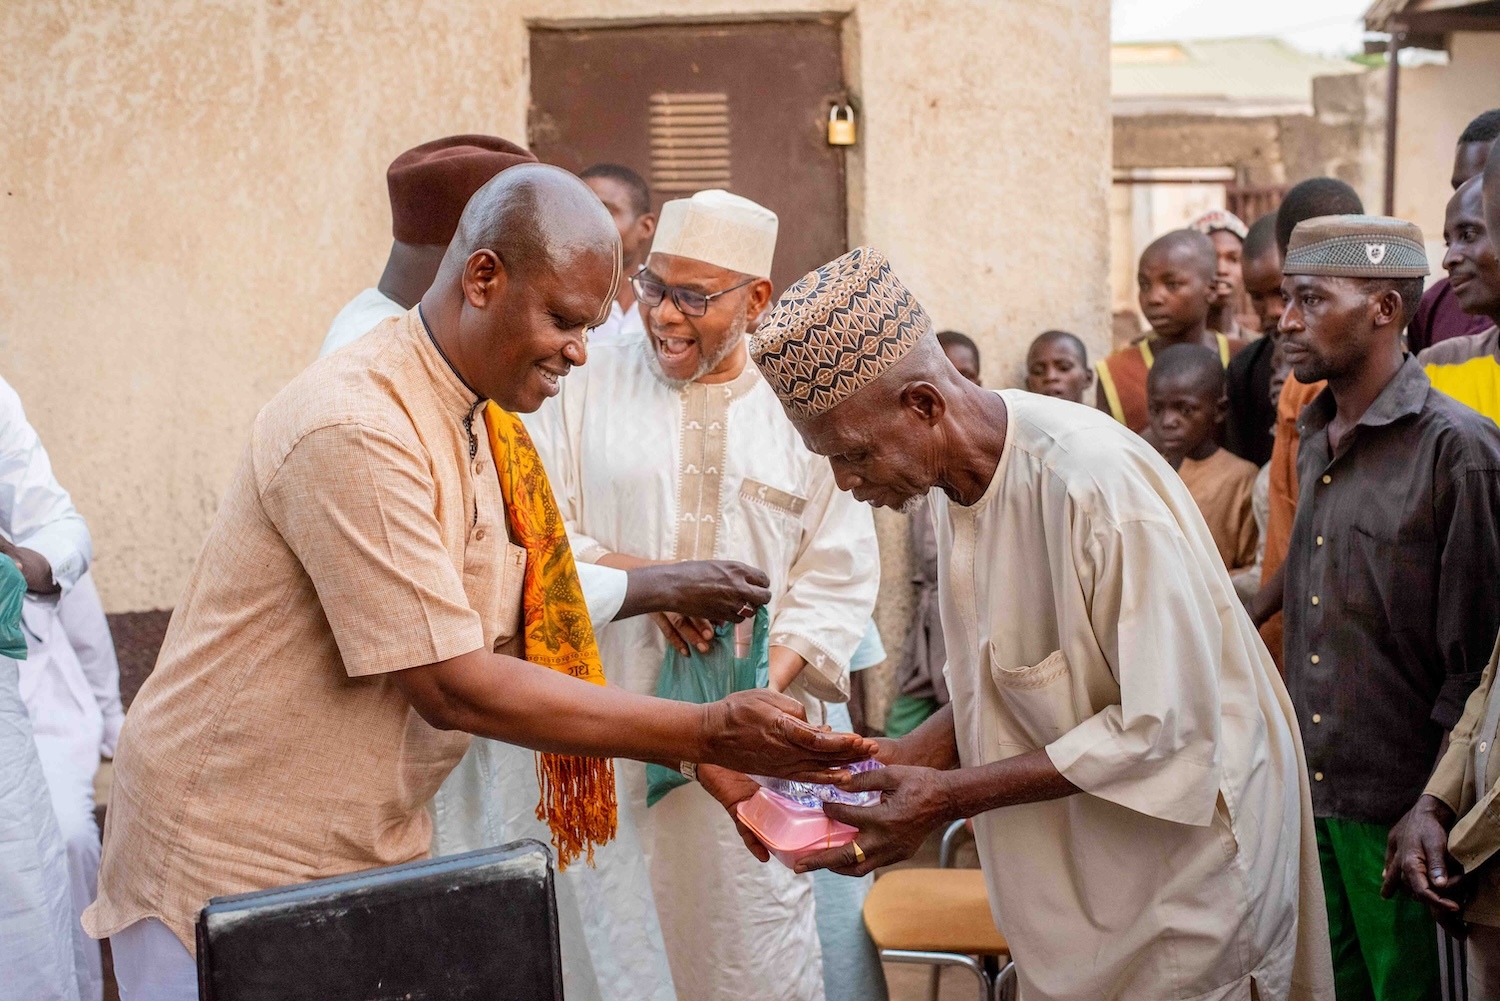 Two elderly men in traditional Nigerian attire exchanging a gift outdoors, surrounded by a group of onlookers.